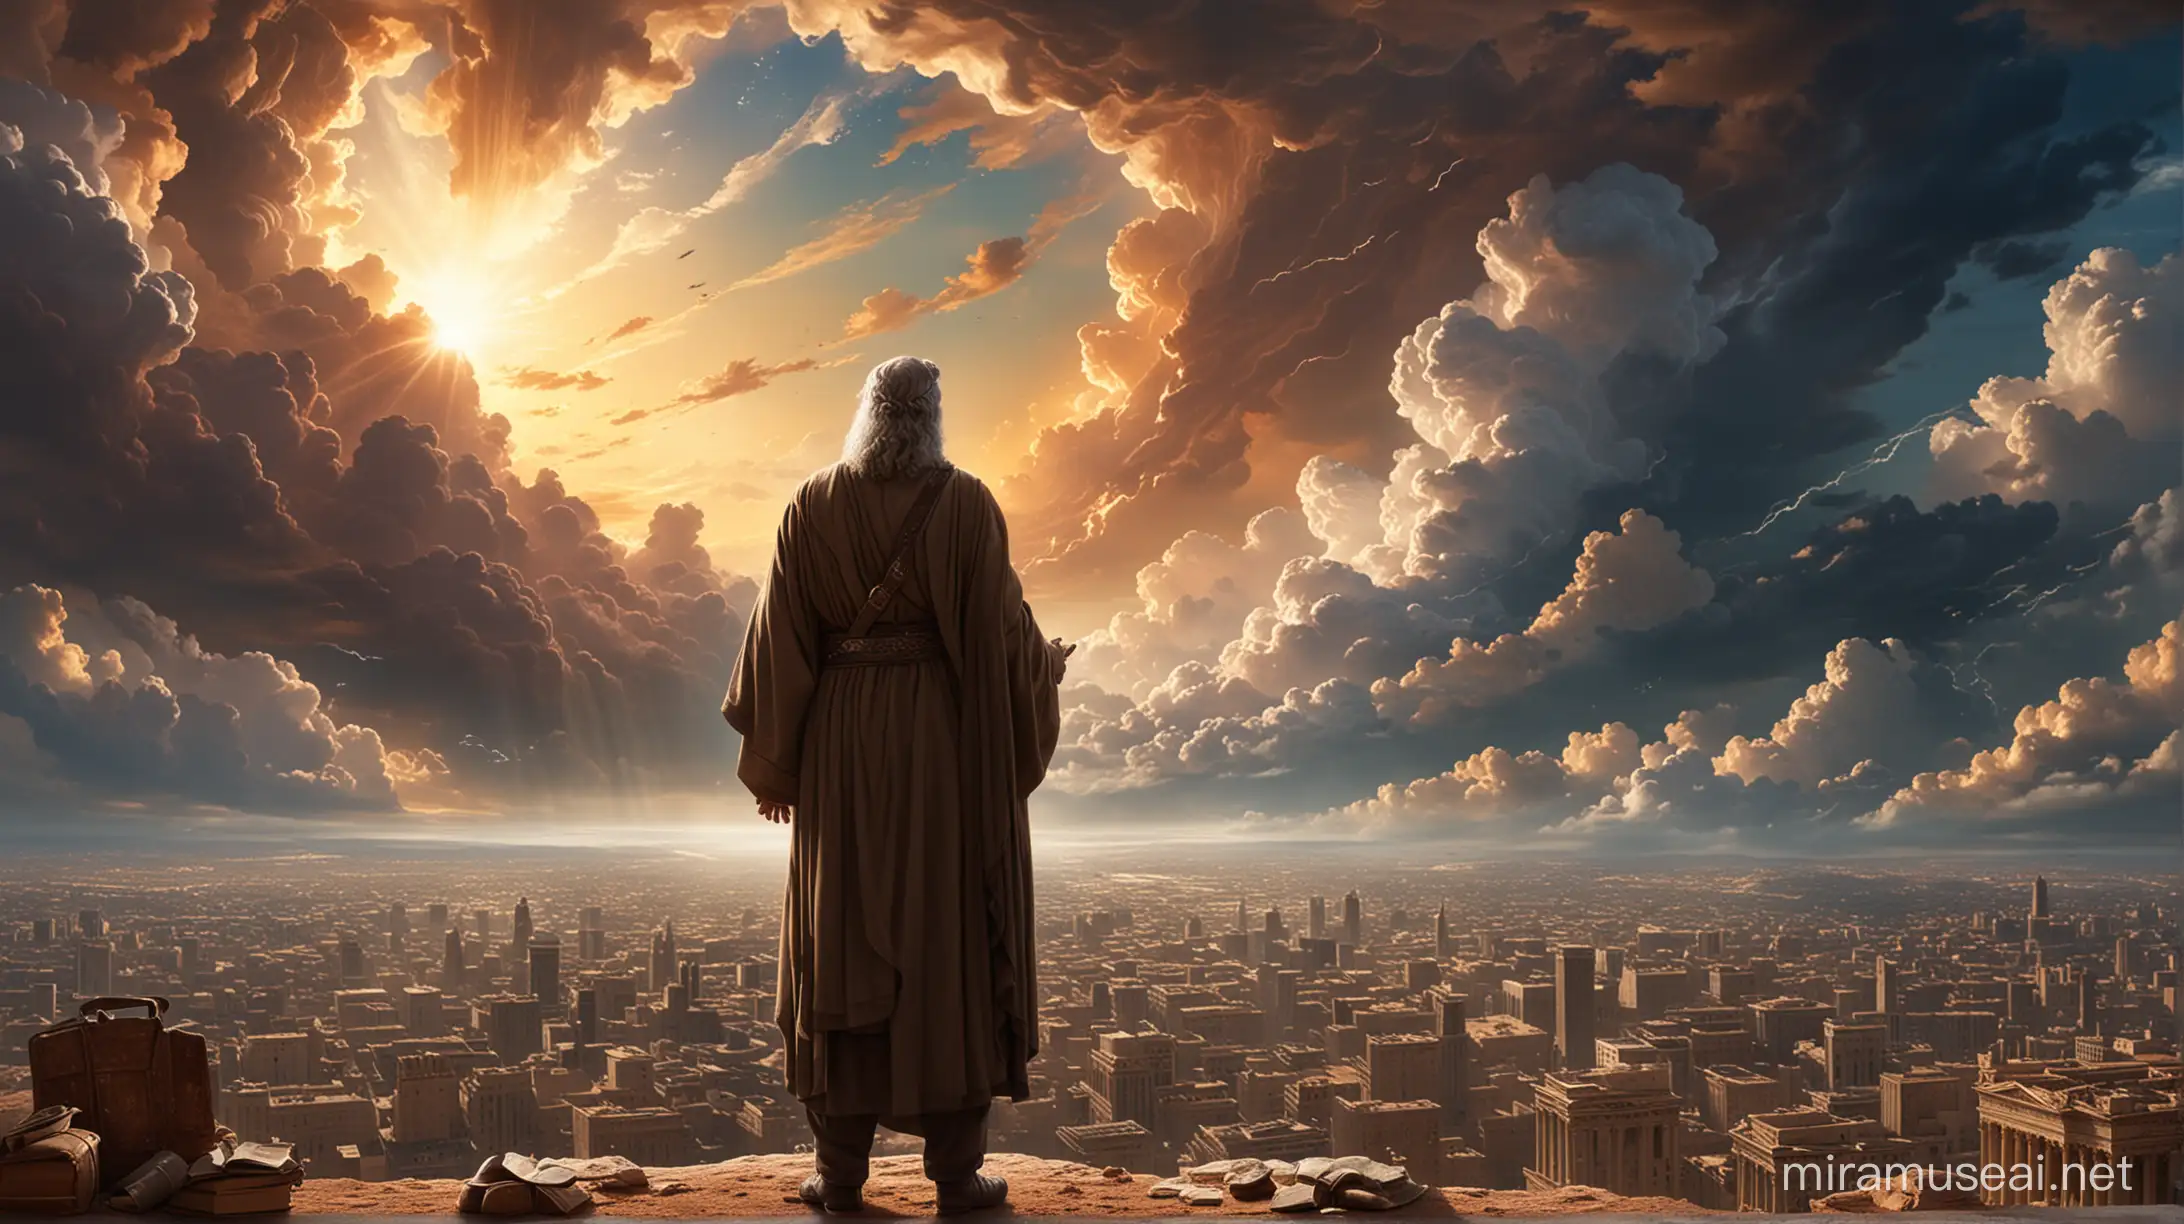 Abraham Communicating with Divine Presence Against Majestic Skyline